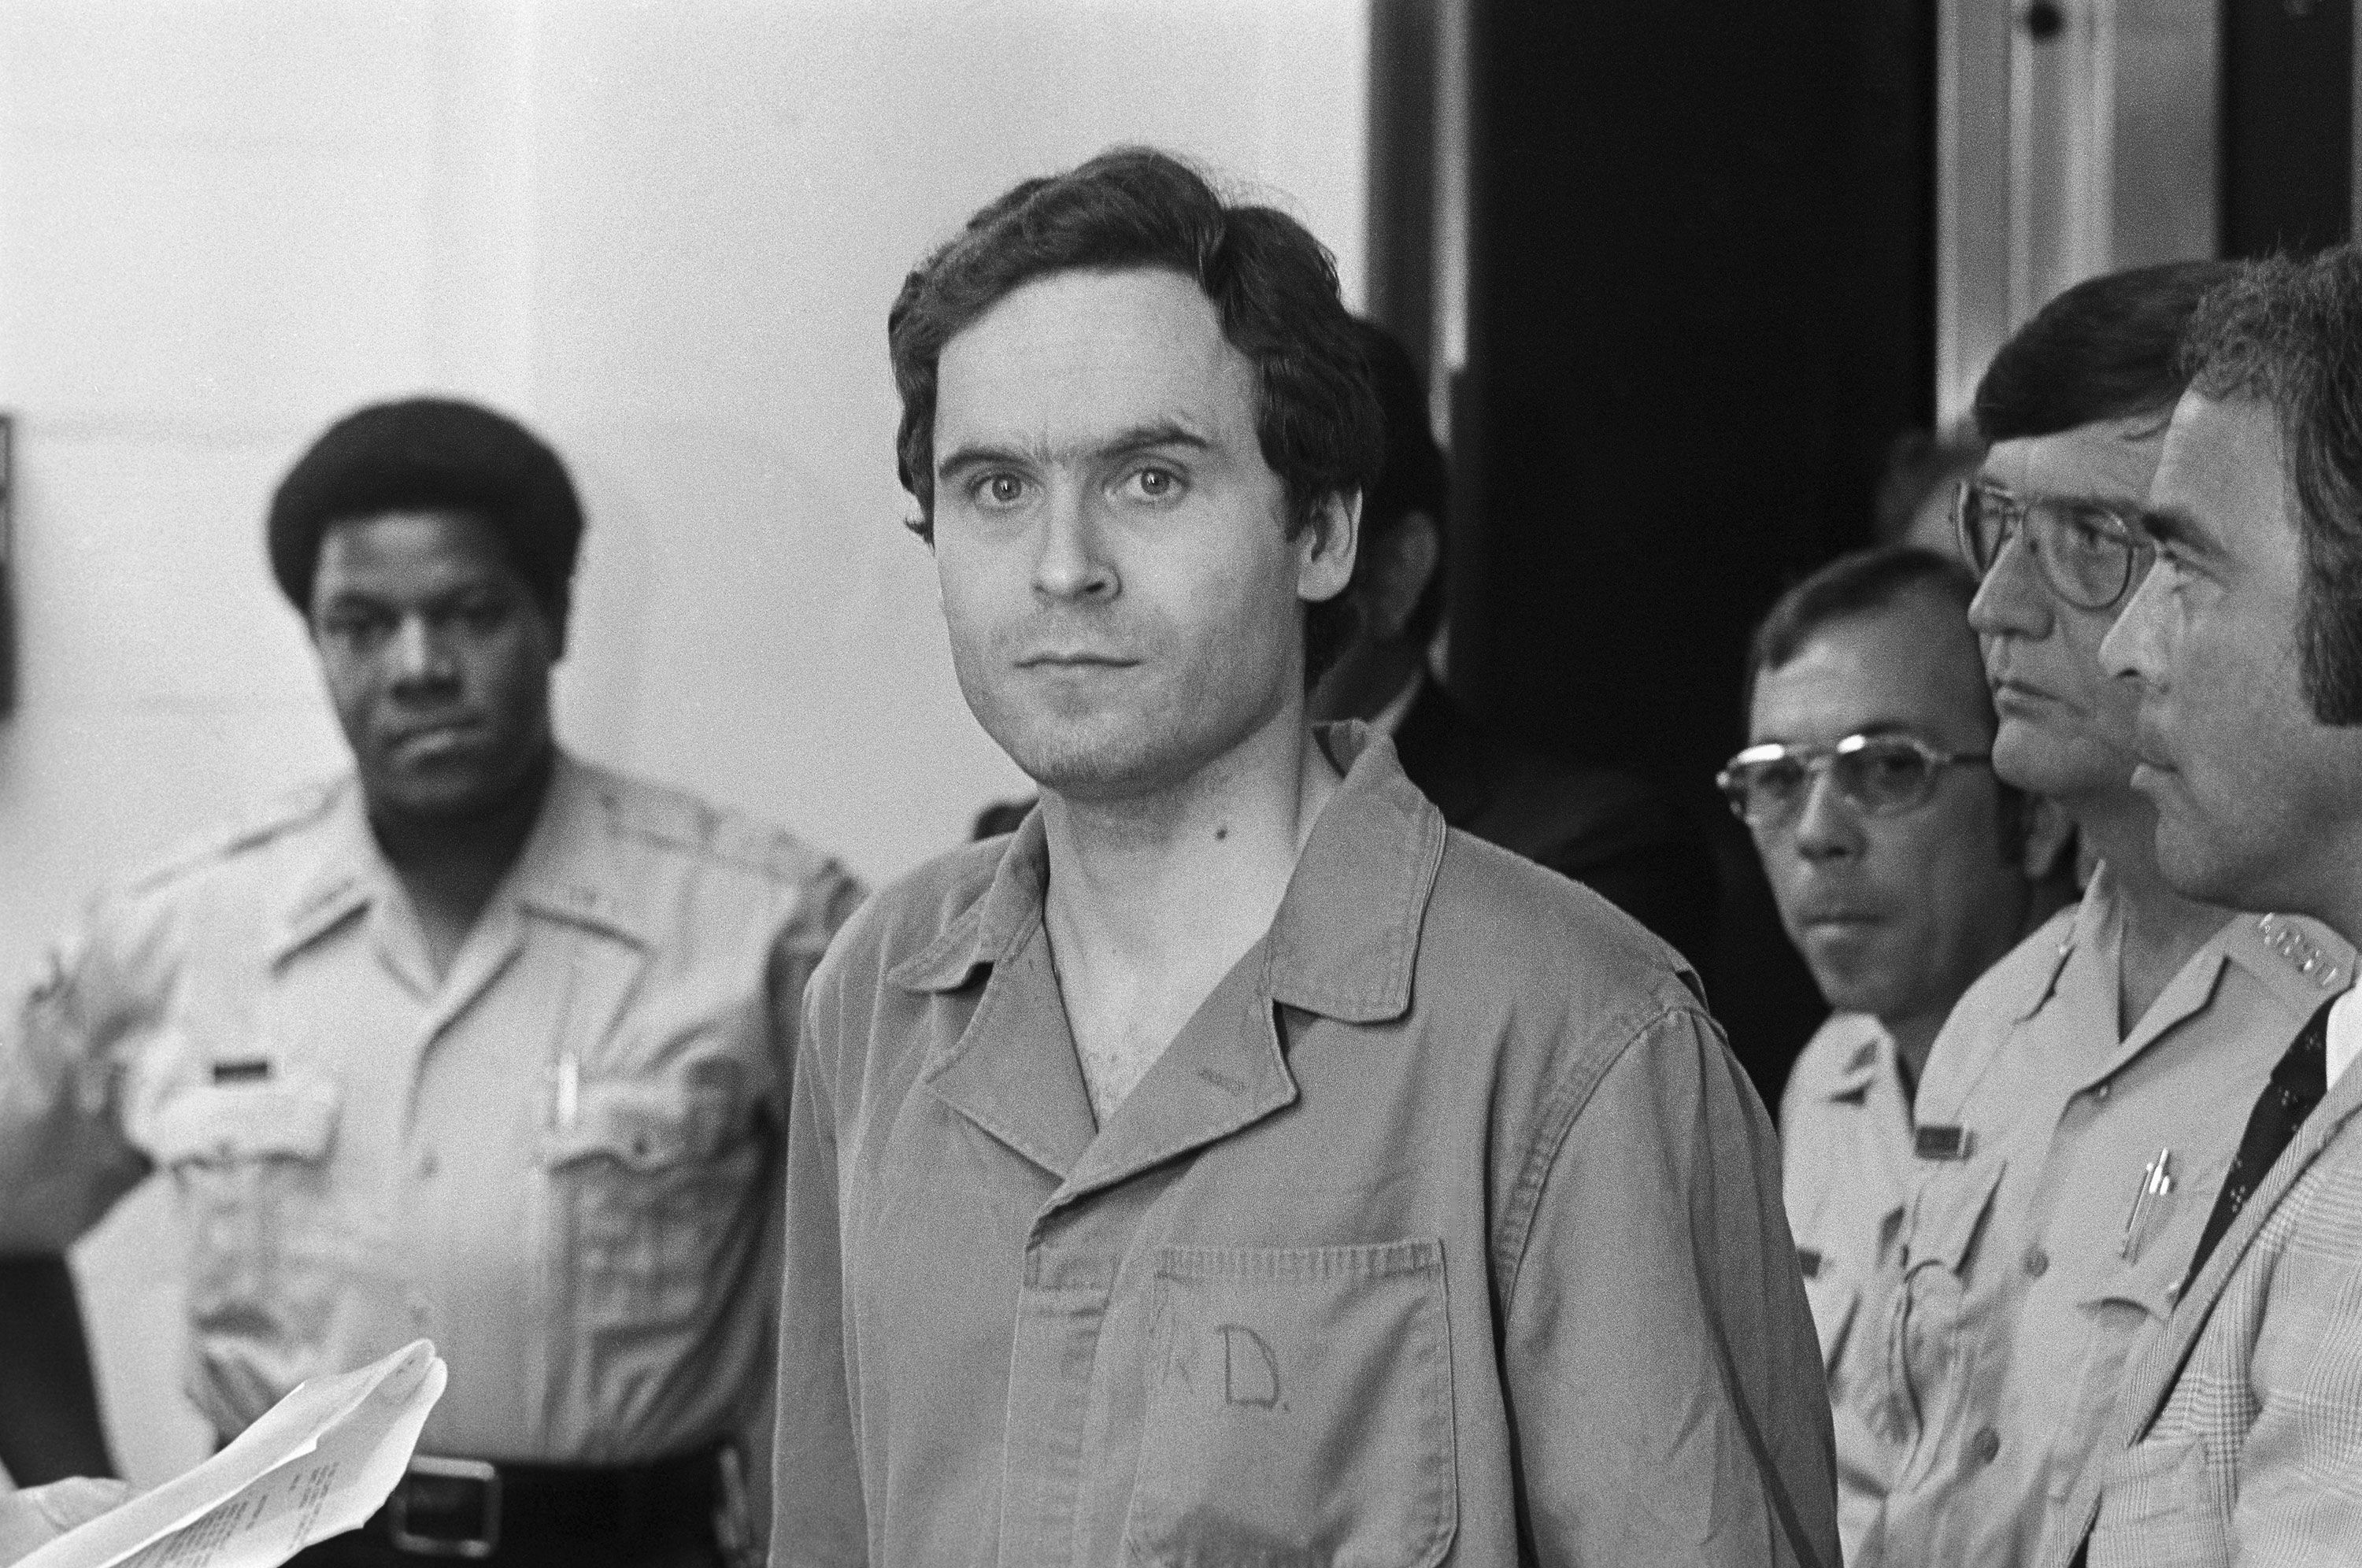 Serial killers. Mass murderers. What's the difference? - Sidney Daily News